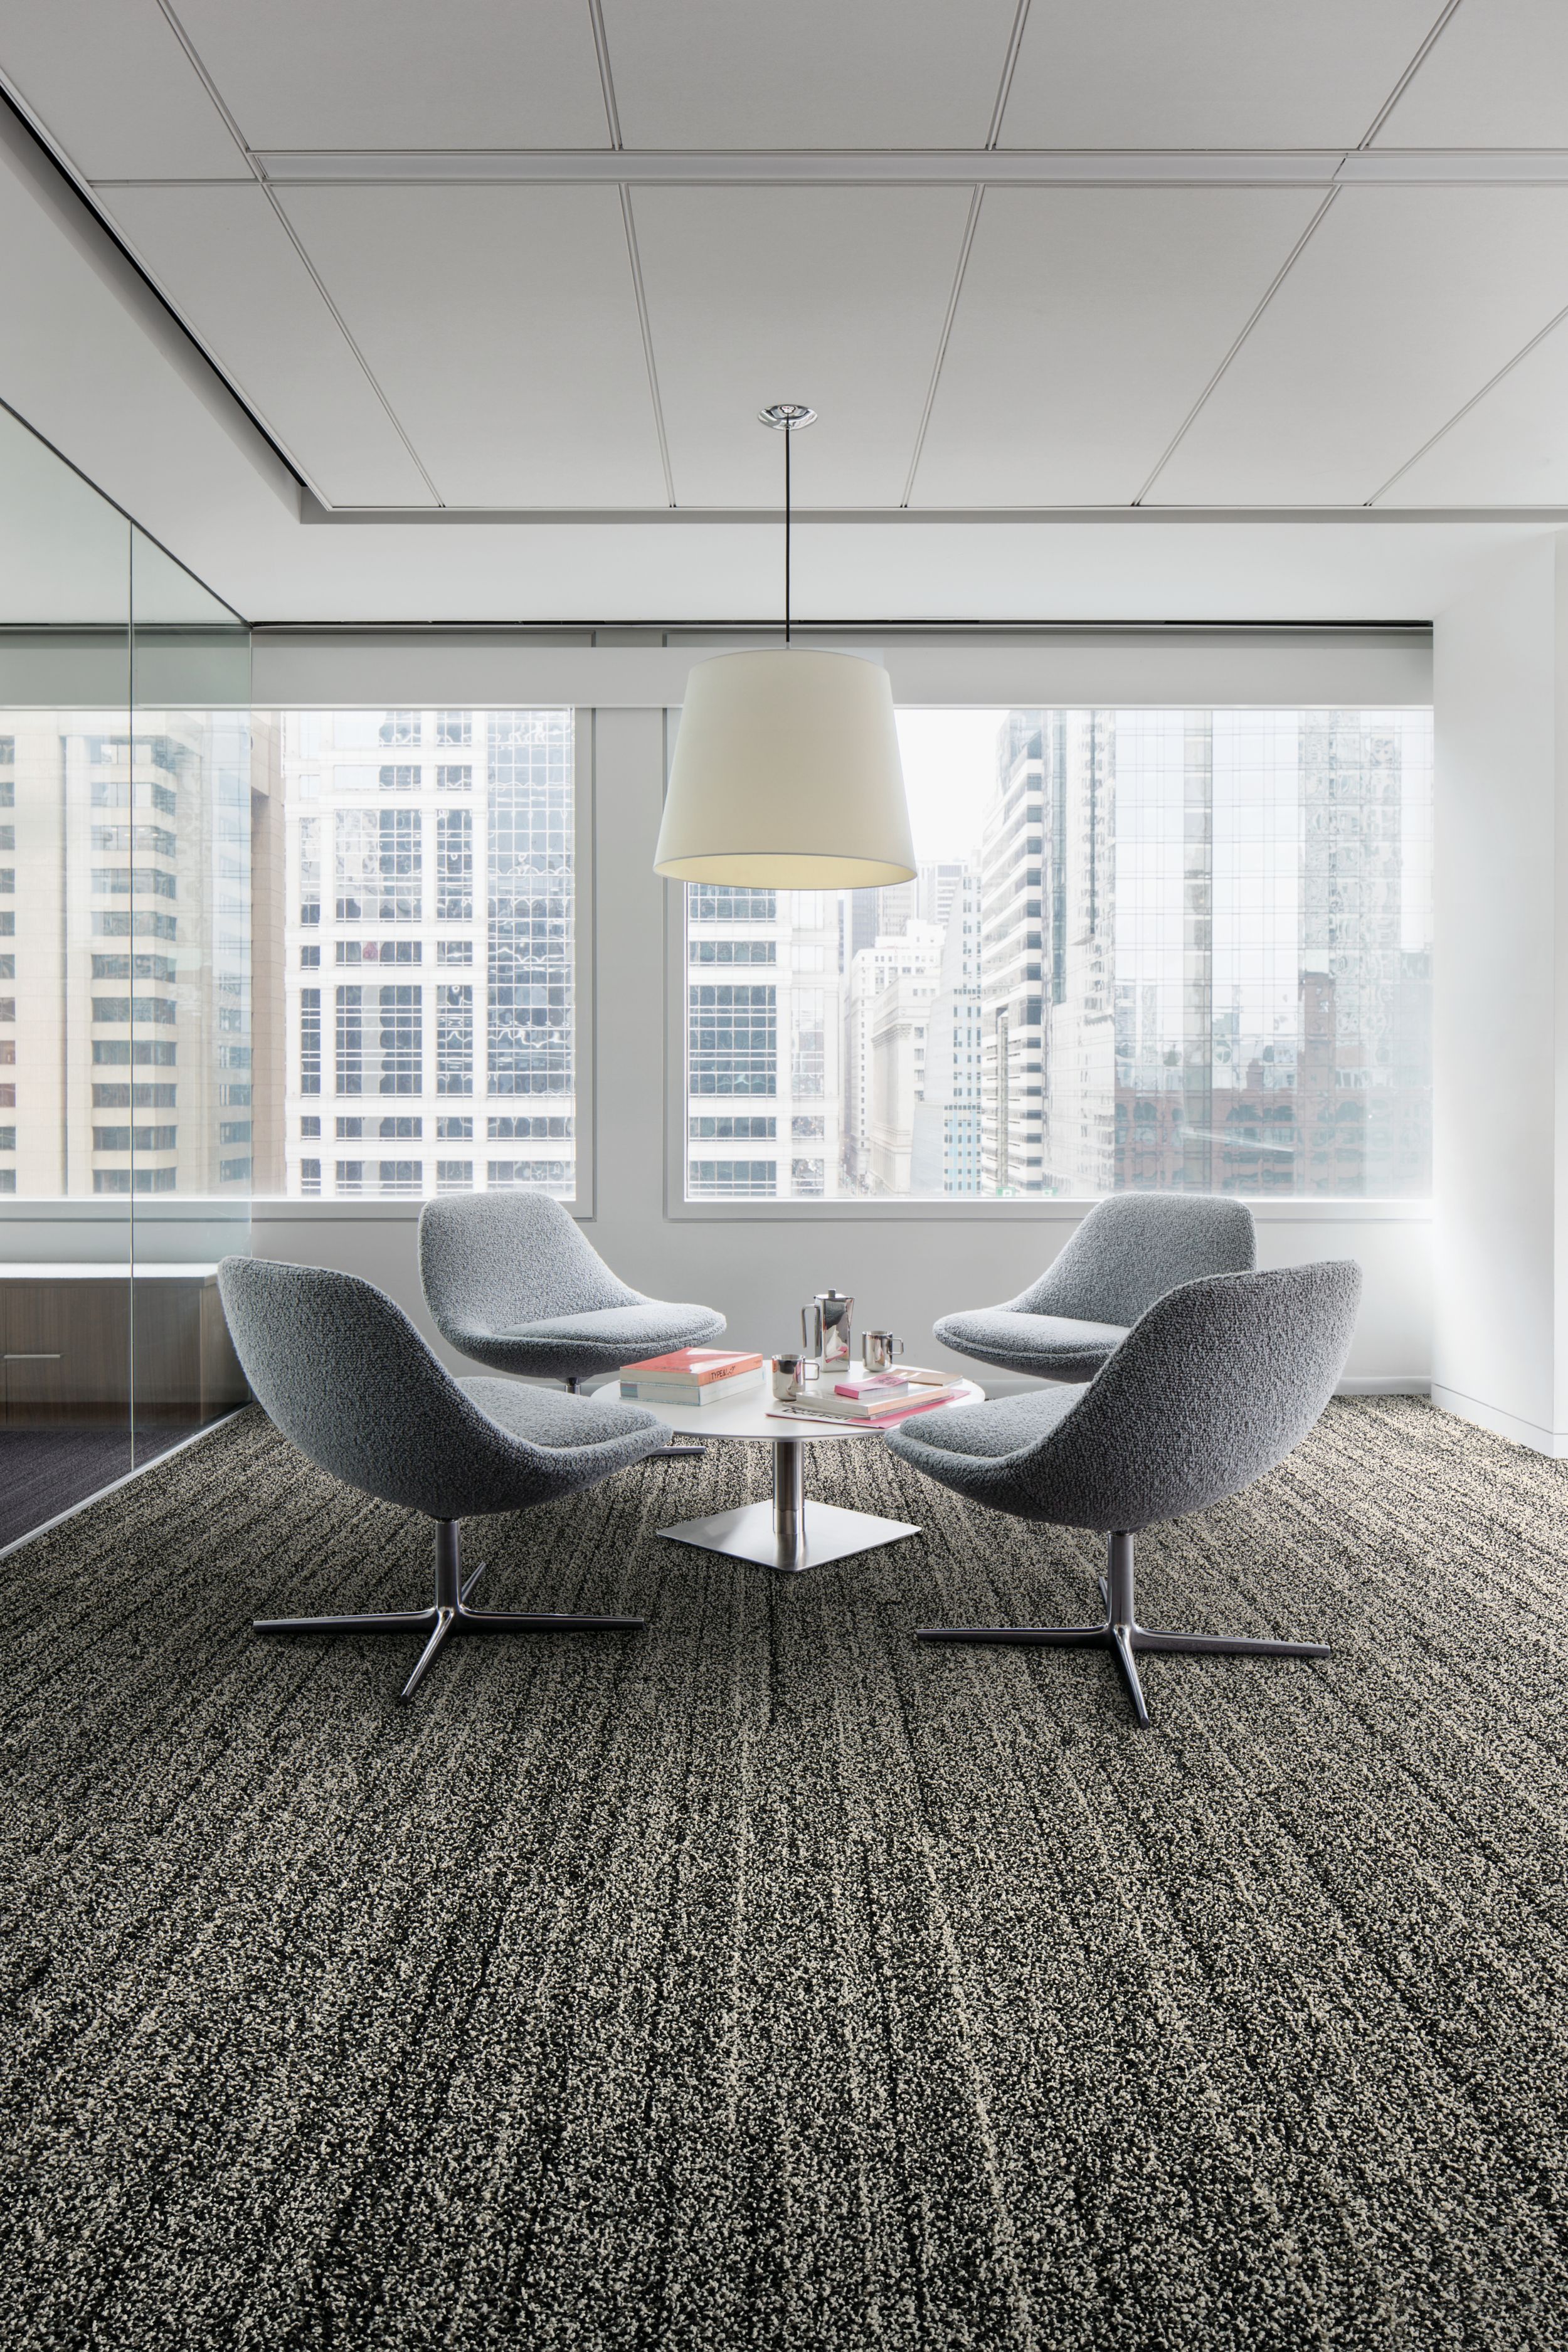 Interface Overedge plank carpet tile with fabric chairs around round table imagen número 6